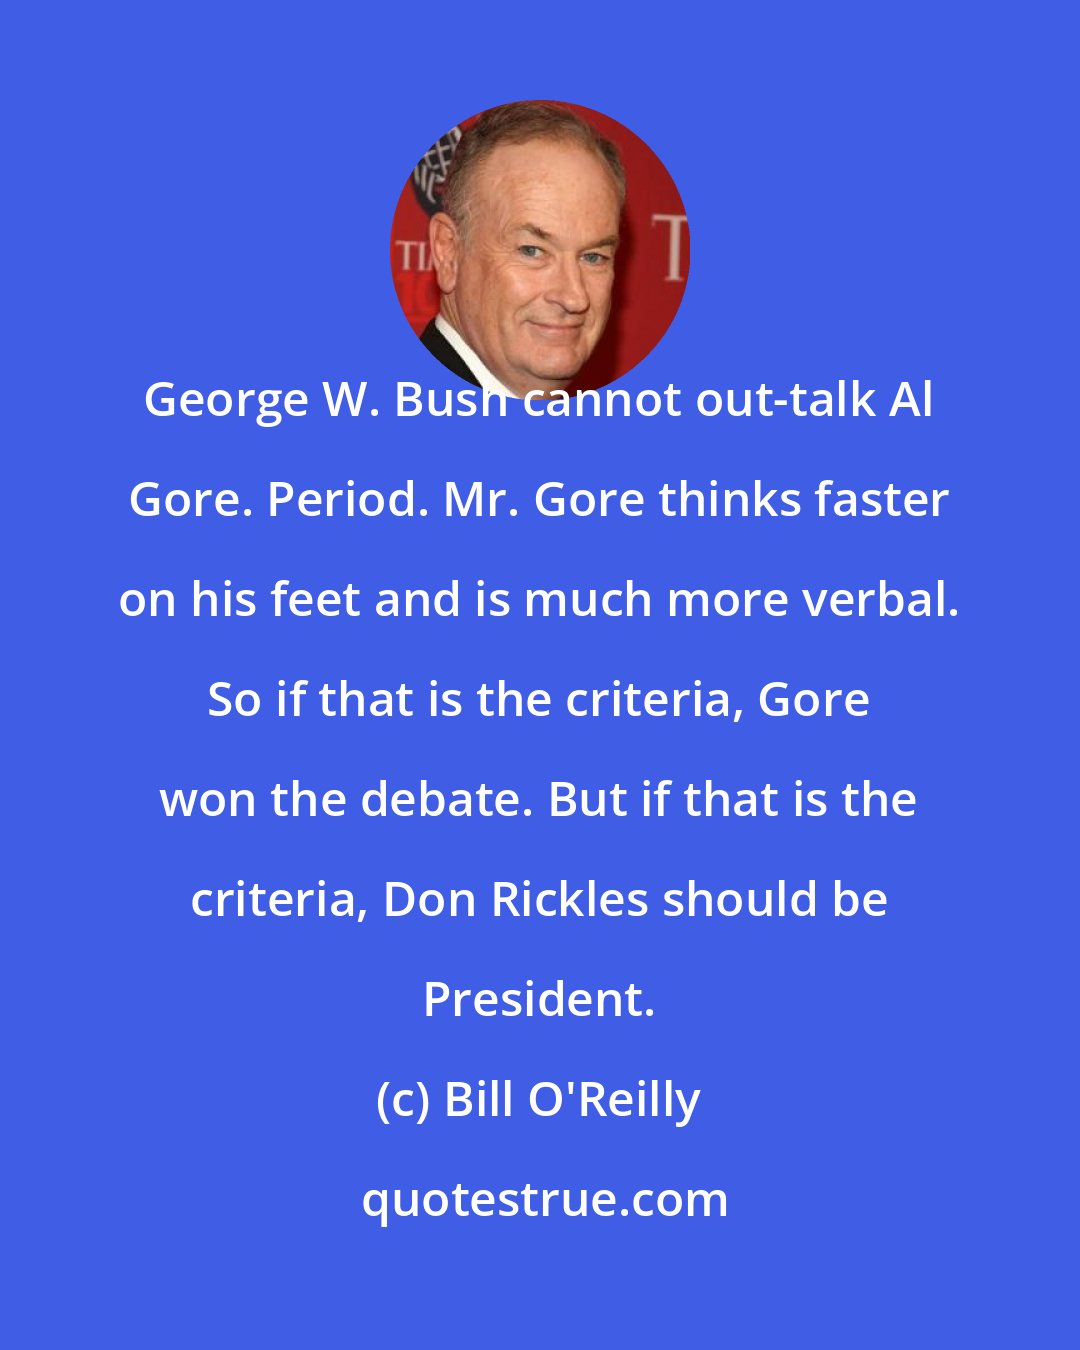 Bill O'Reilly: George W. Bush cannot out-talk Al Gore. Period. Mr. Gore thinks faster on his feet and is much more verbal. So if that is the criteria, Gore won the debate. But if that is the criteria, Don Rickles should be President.